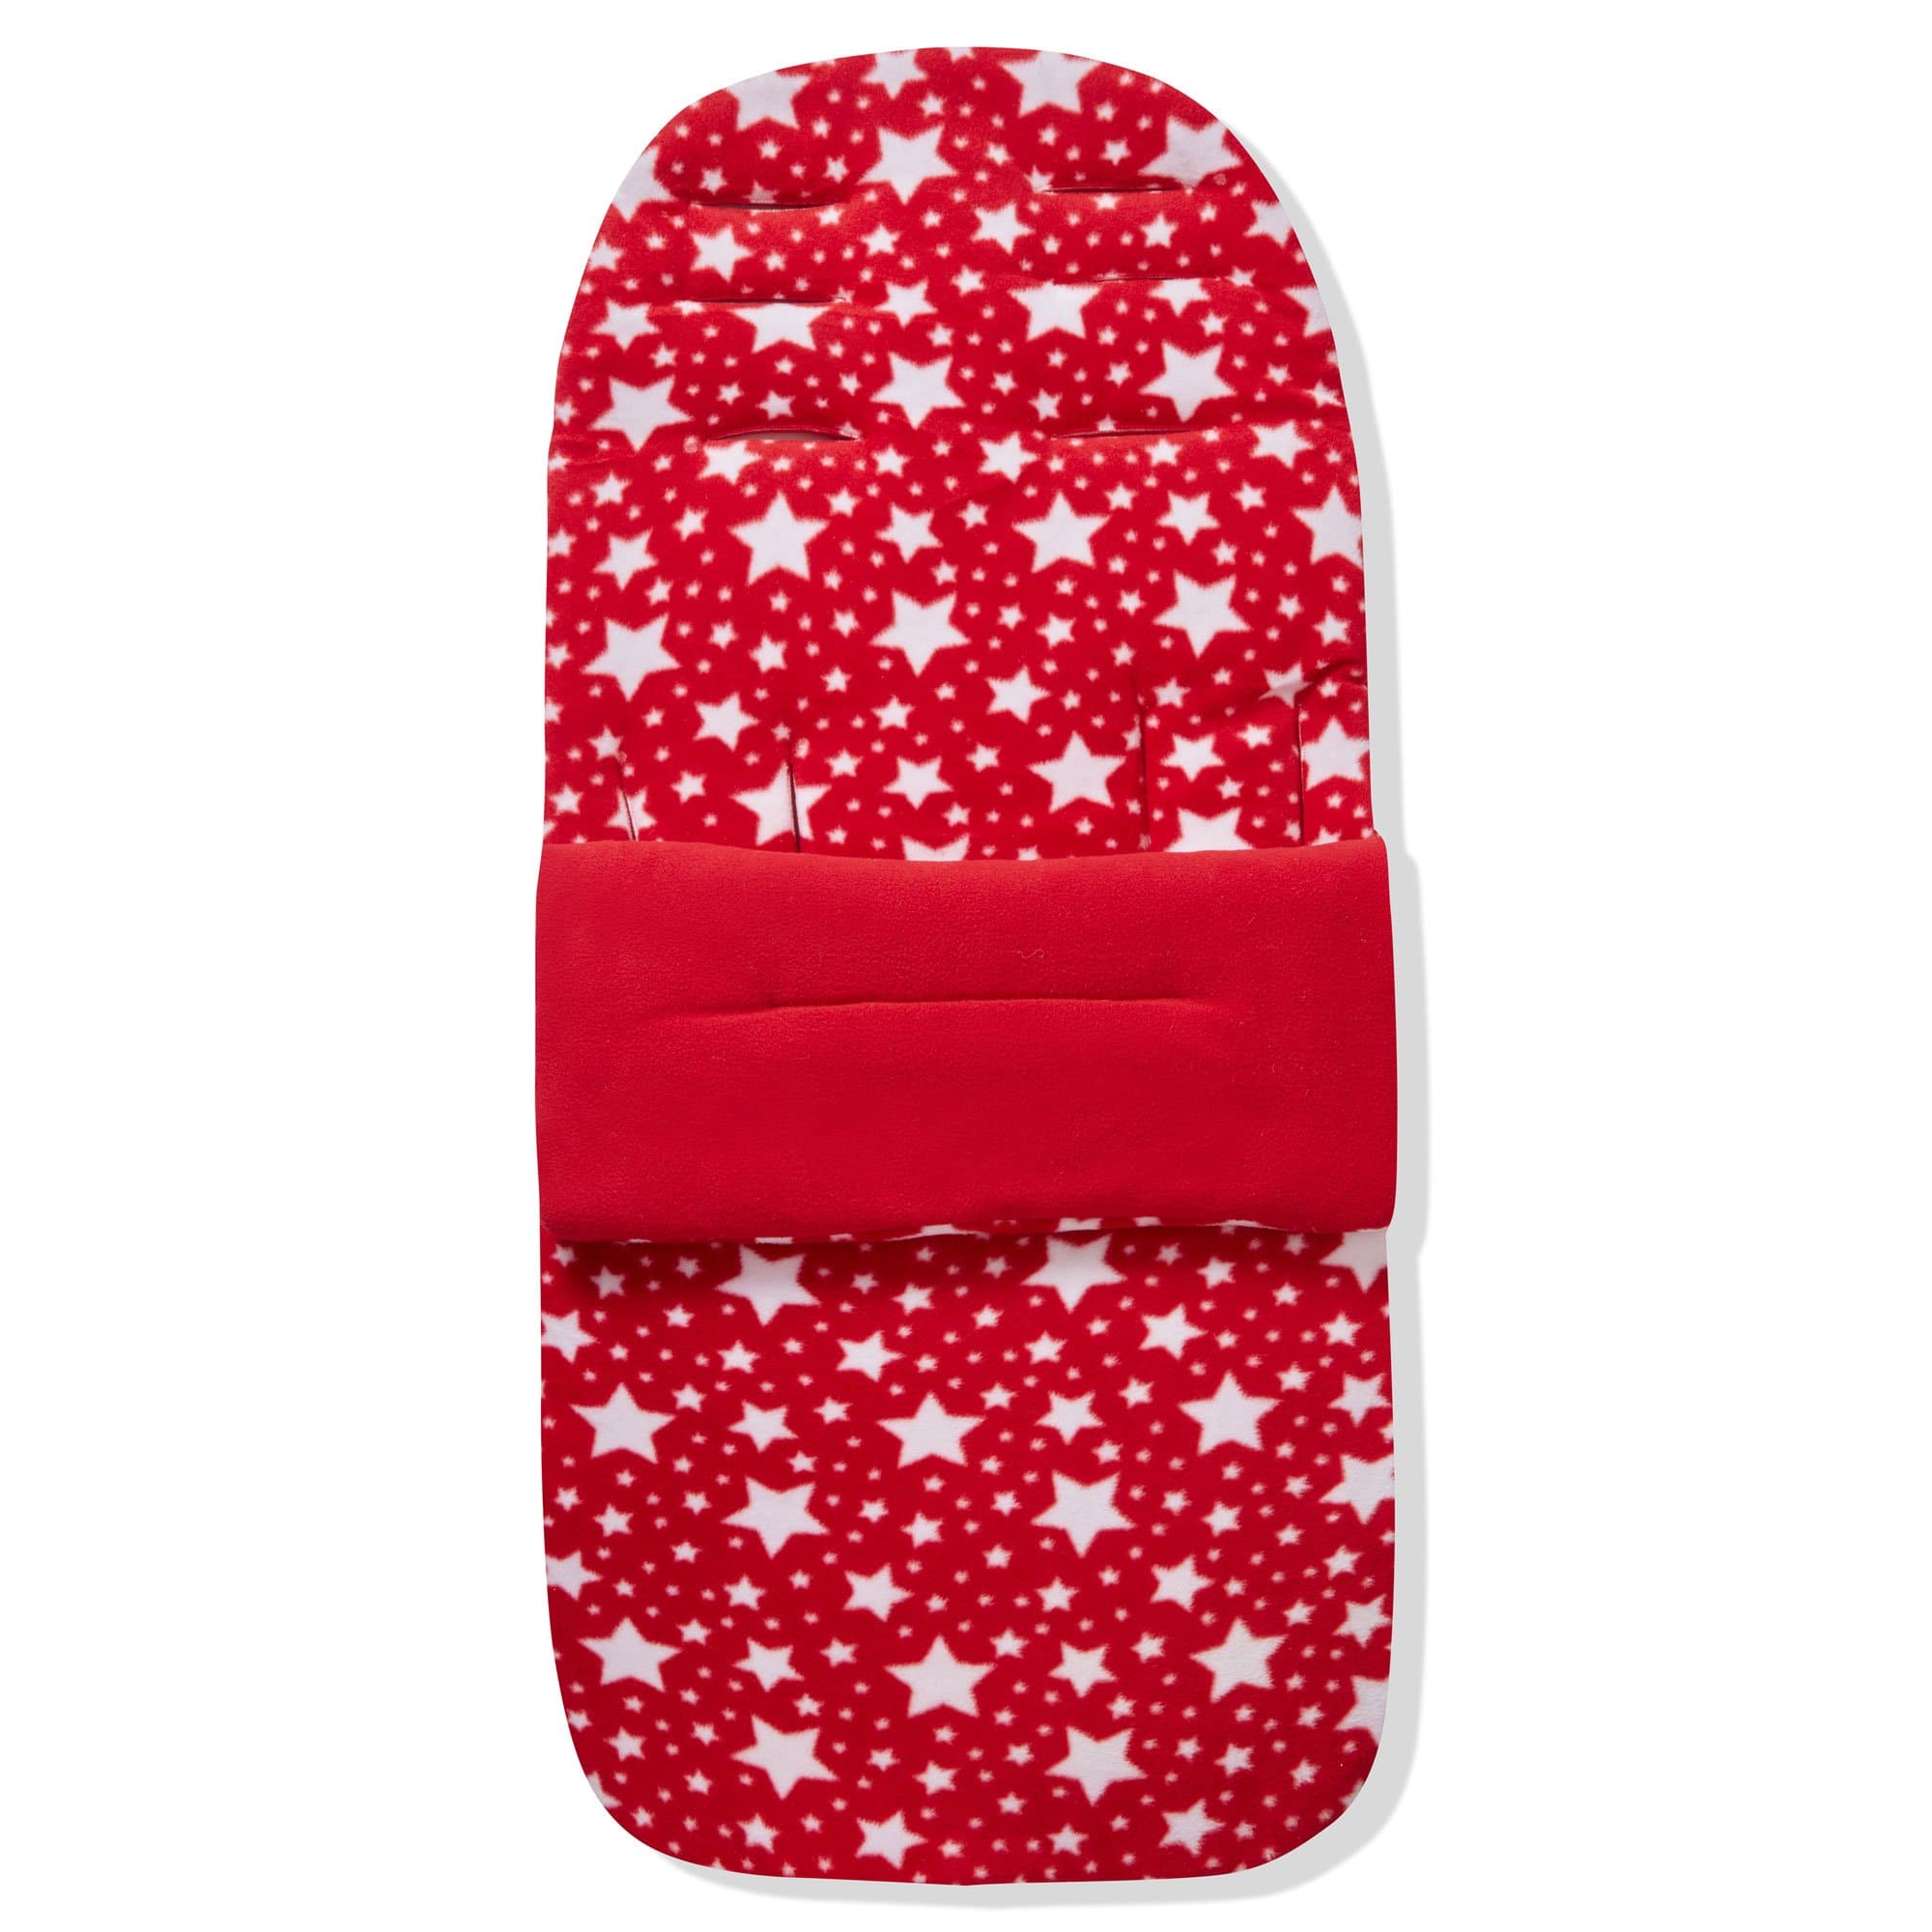 Fleece Footmuff / Cosy Toes Compatible with Gesslein - Red Star / Fits All Models | For Your Little One